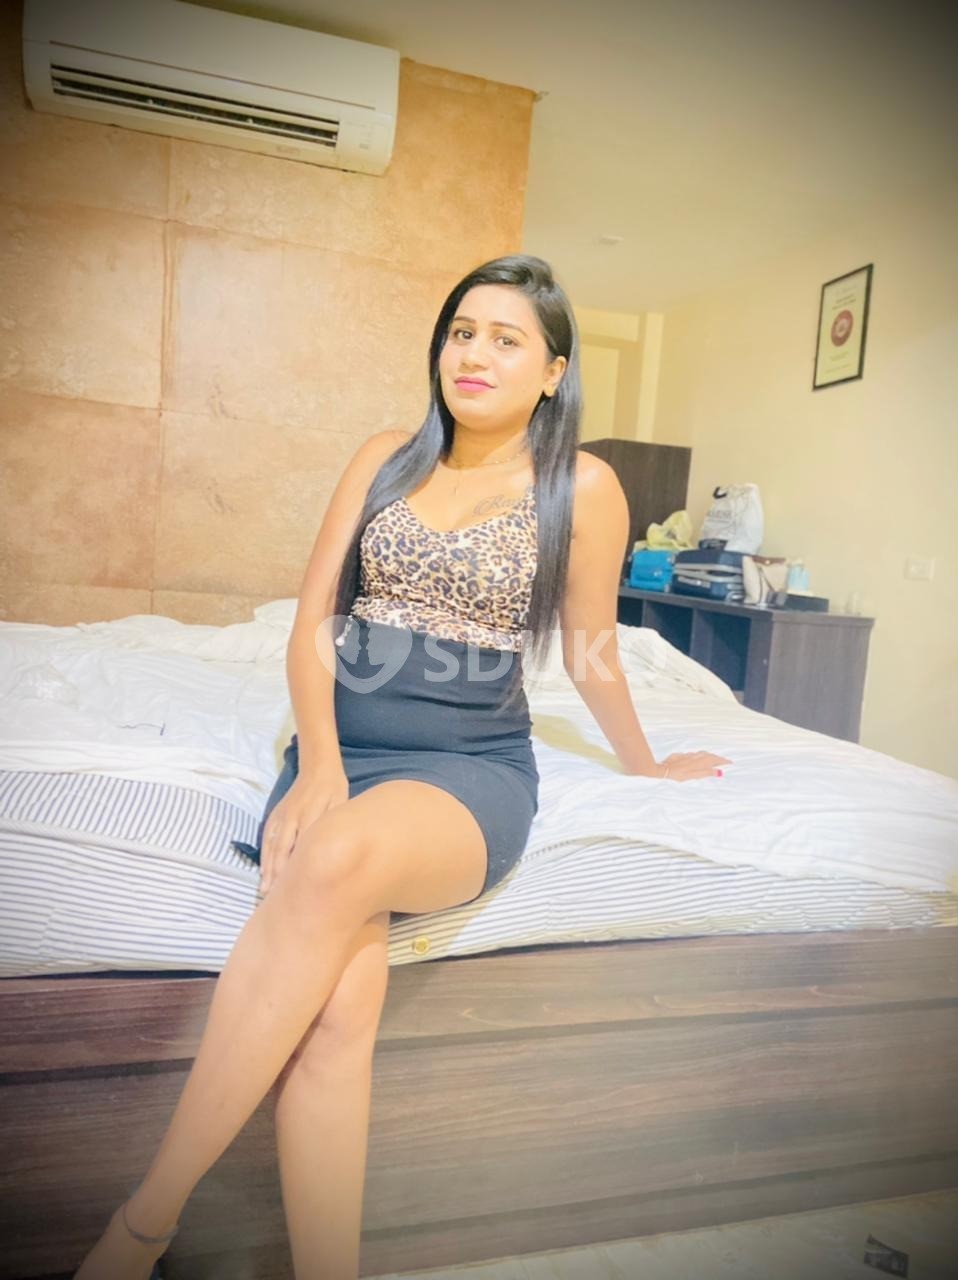 MIYAPUR ✨24×7 DOORSTEP  INCALL ❤ OUTCALL SERVICE AVAILABLE CALL ME NOW LOW RATE PRIVATE DECENT LOCAL COLLAGE GIRL H